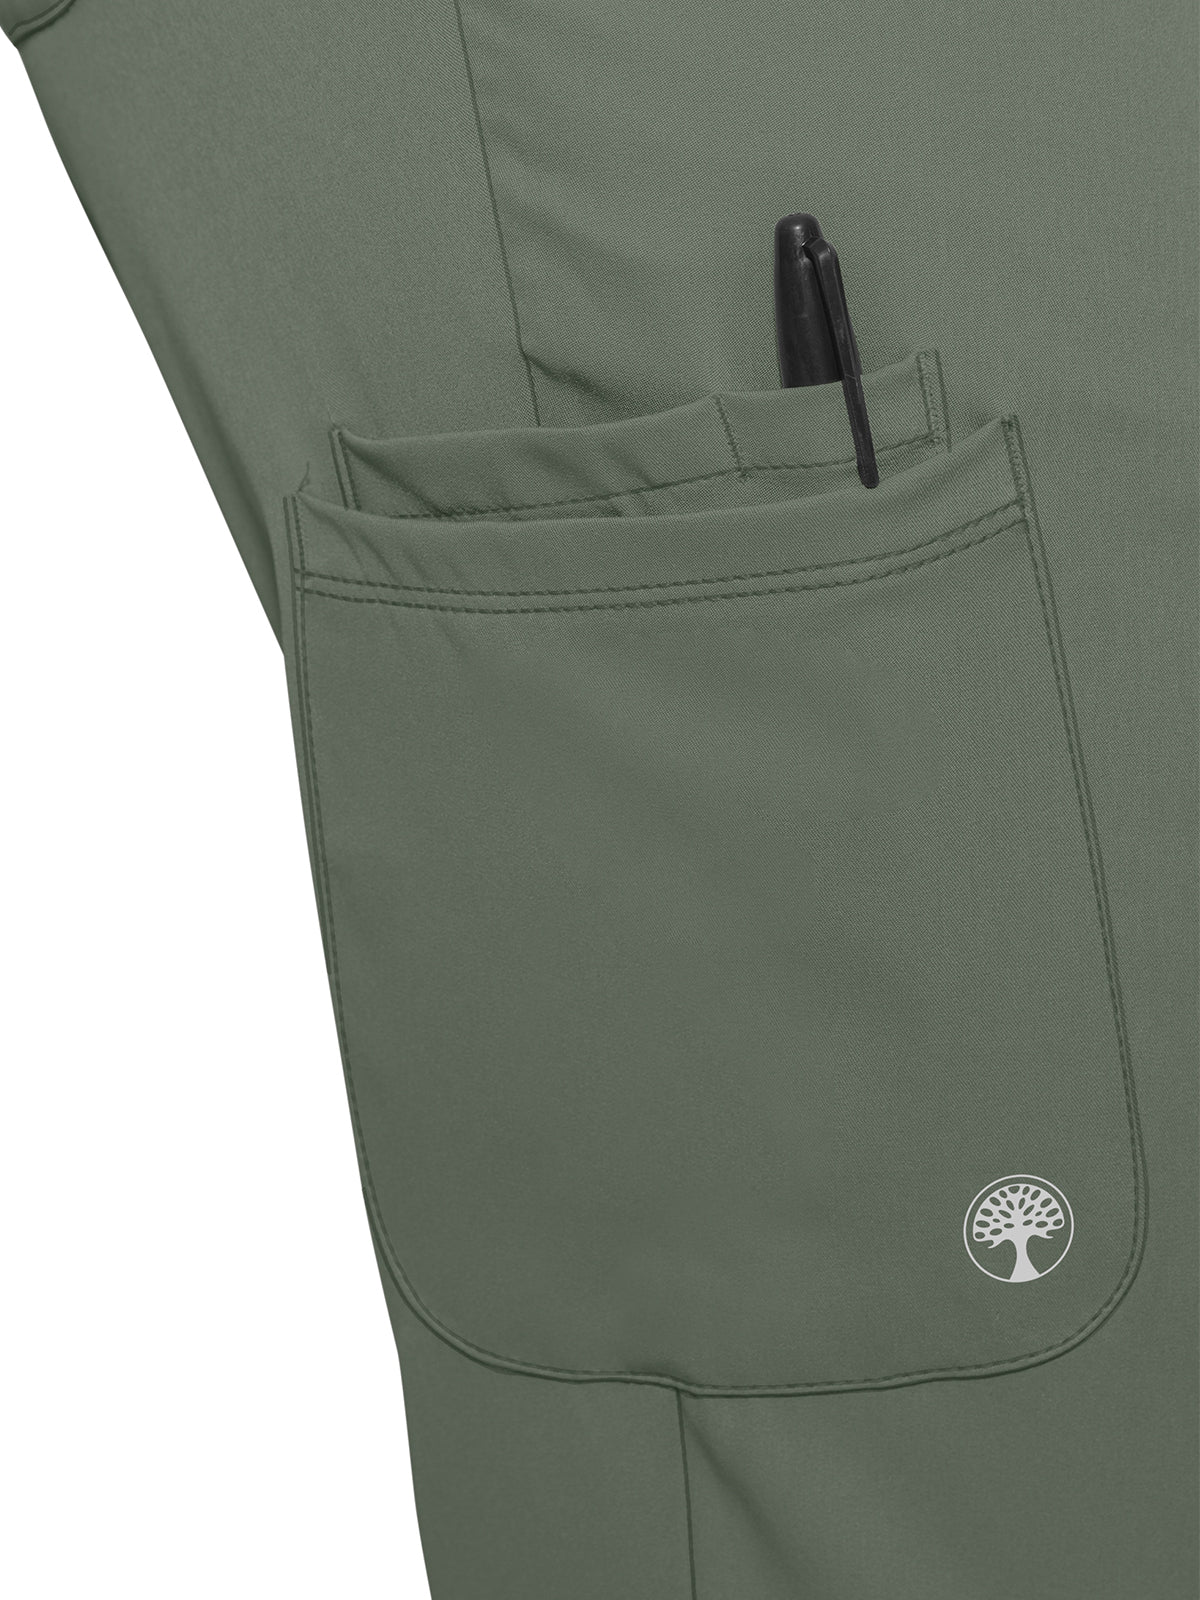 Women's Moisture Wicking Pant - 9560 - Olive